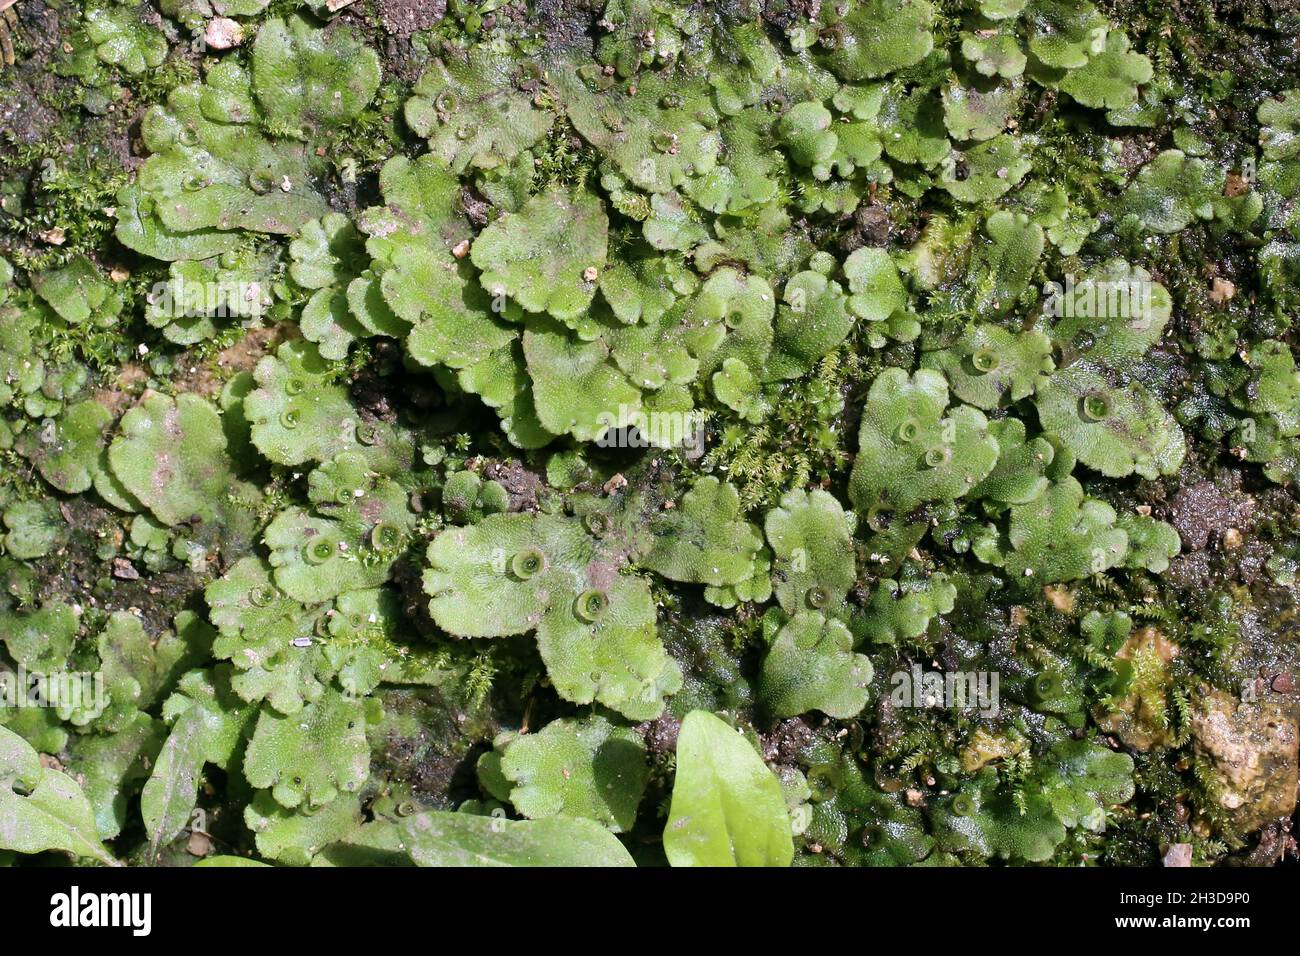 Sp marchantia What are